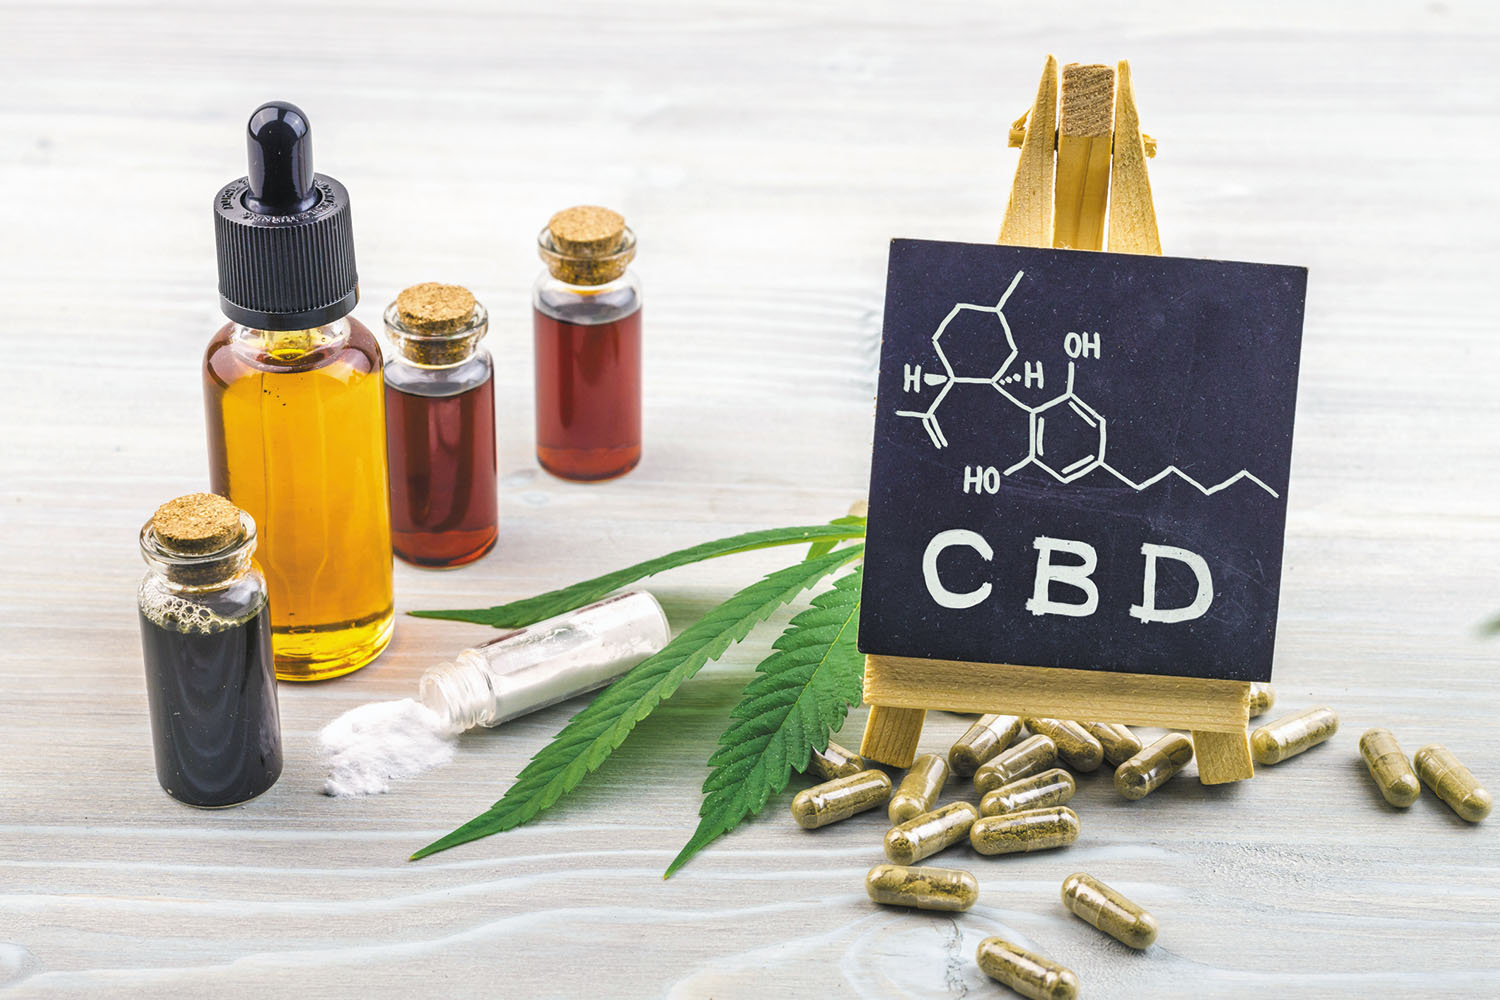 Medications Should Not be Taken With CBD